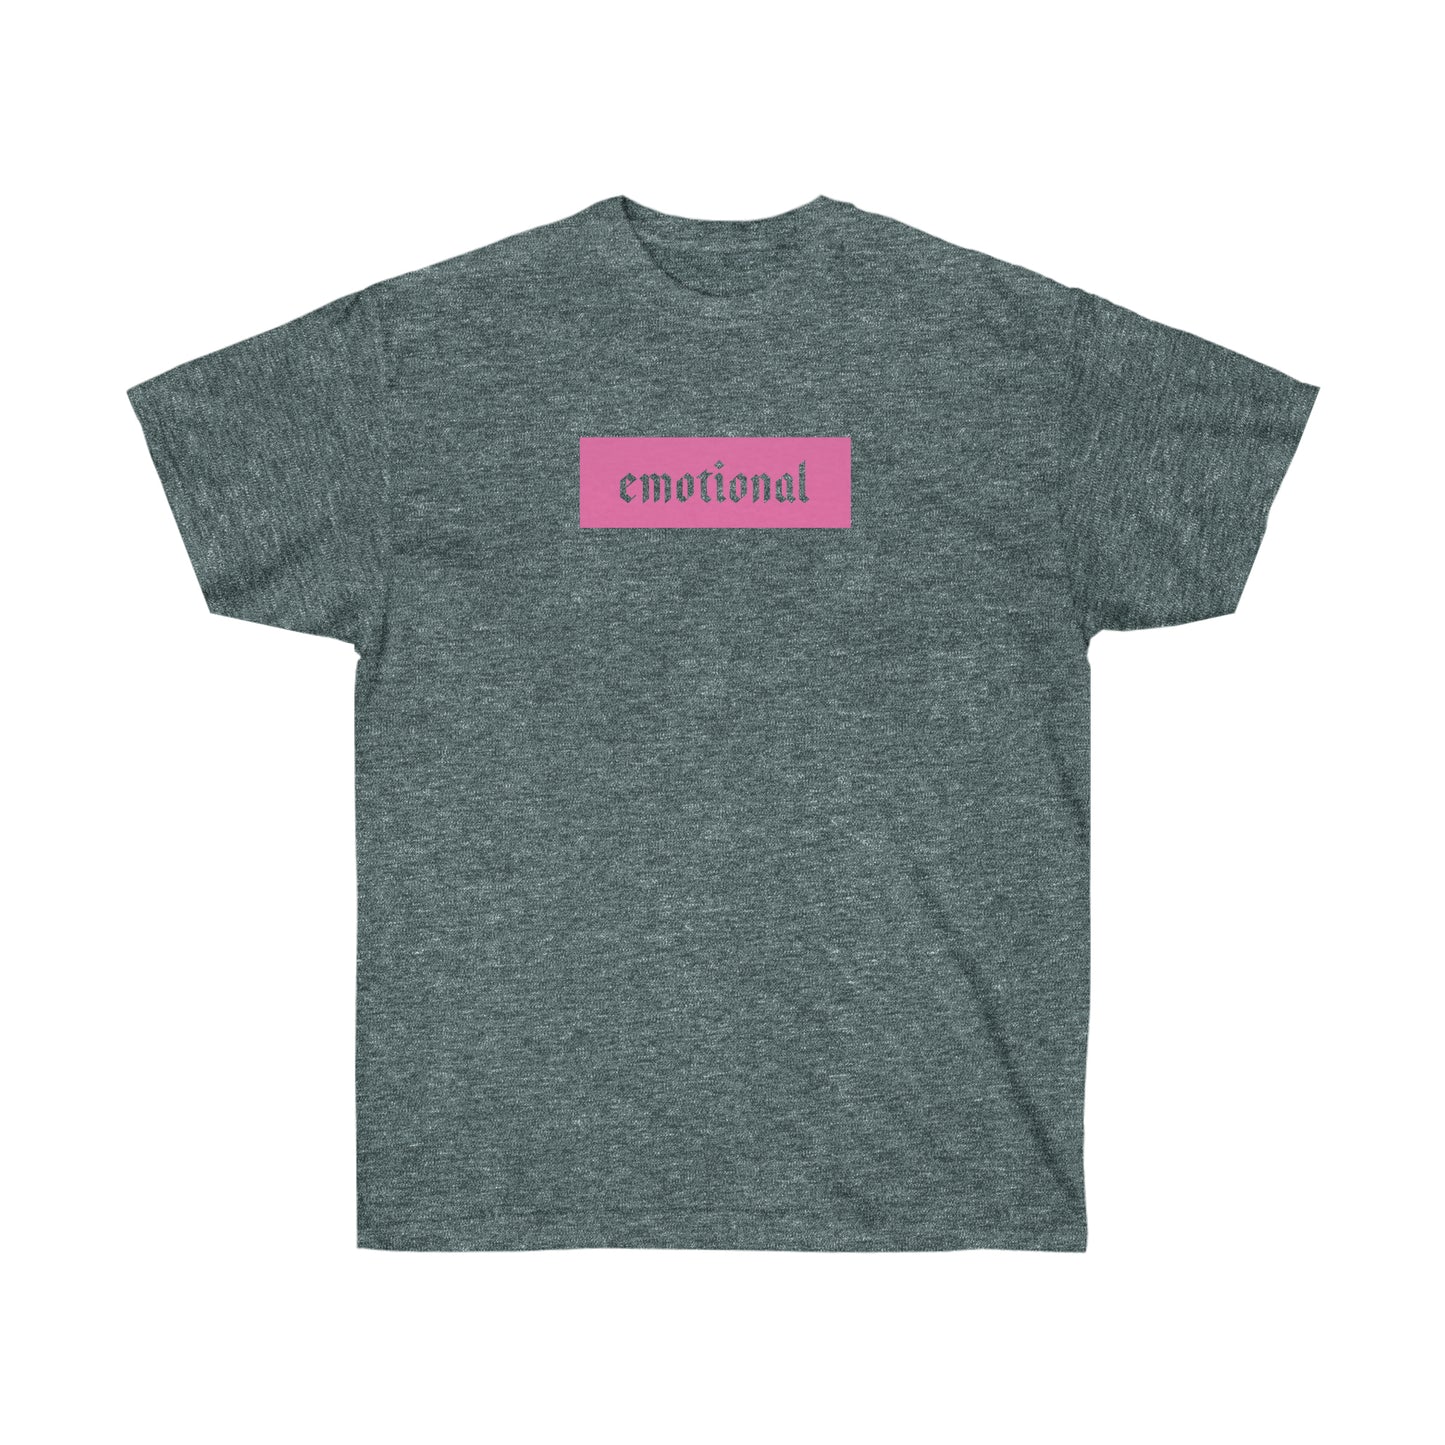 Emotional Aesthetic shirt Emo Tshirt, Goth tee, Pastel Goth Clothes, Gothic Clothing, Soft Girl Apparel, Egirl Gift, Eboy tee, Edgy Outfit